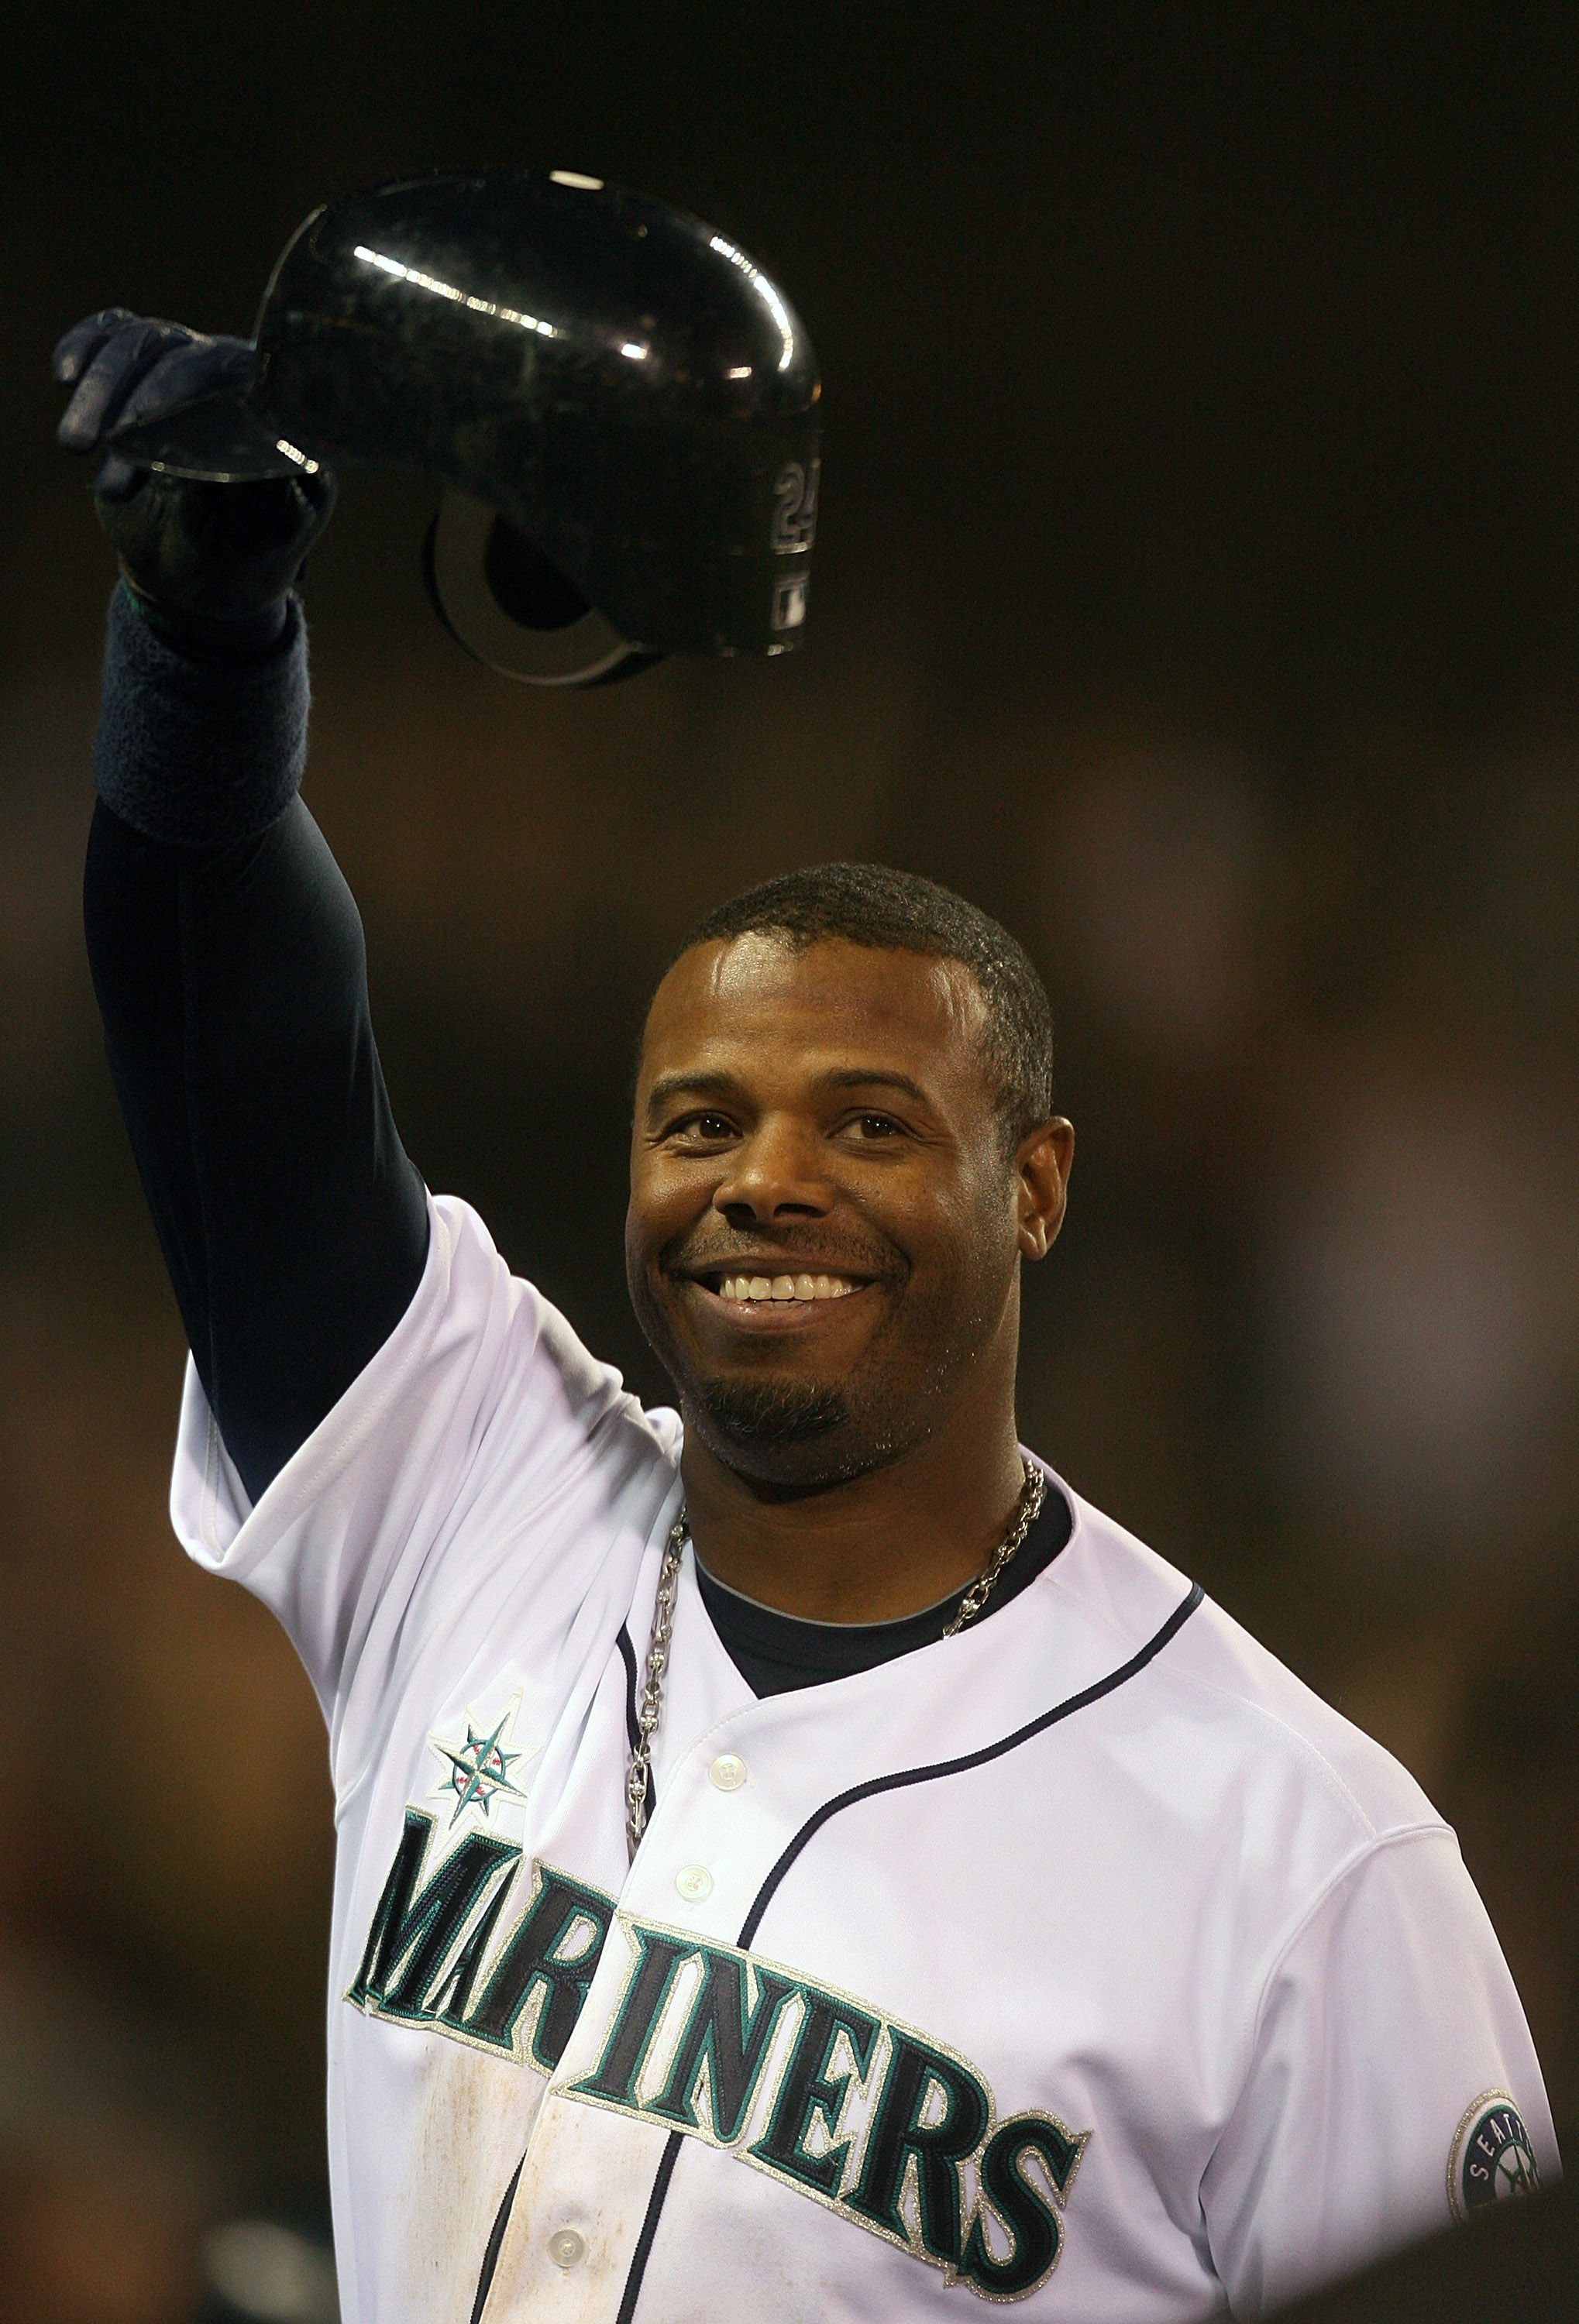 Ken Griffey Jr. Hall of Fame induction will make history